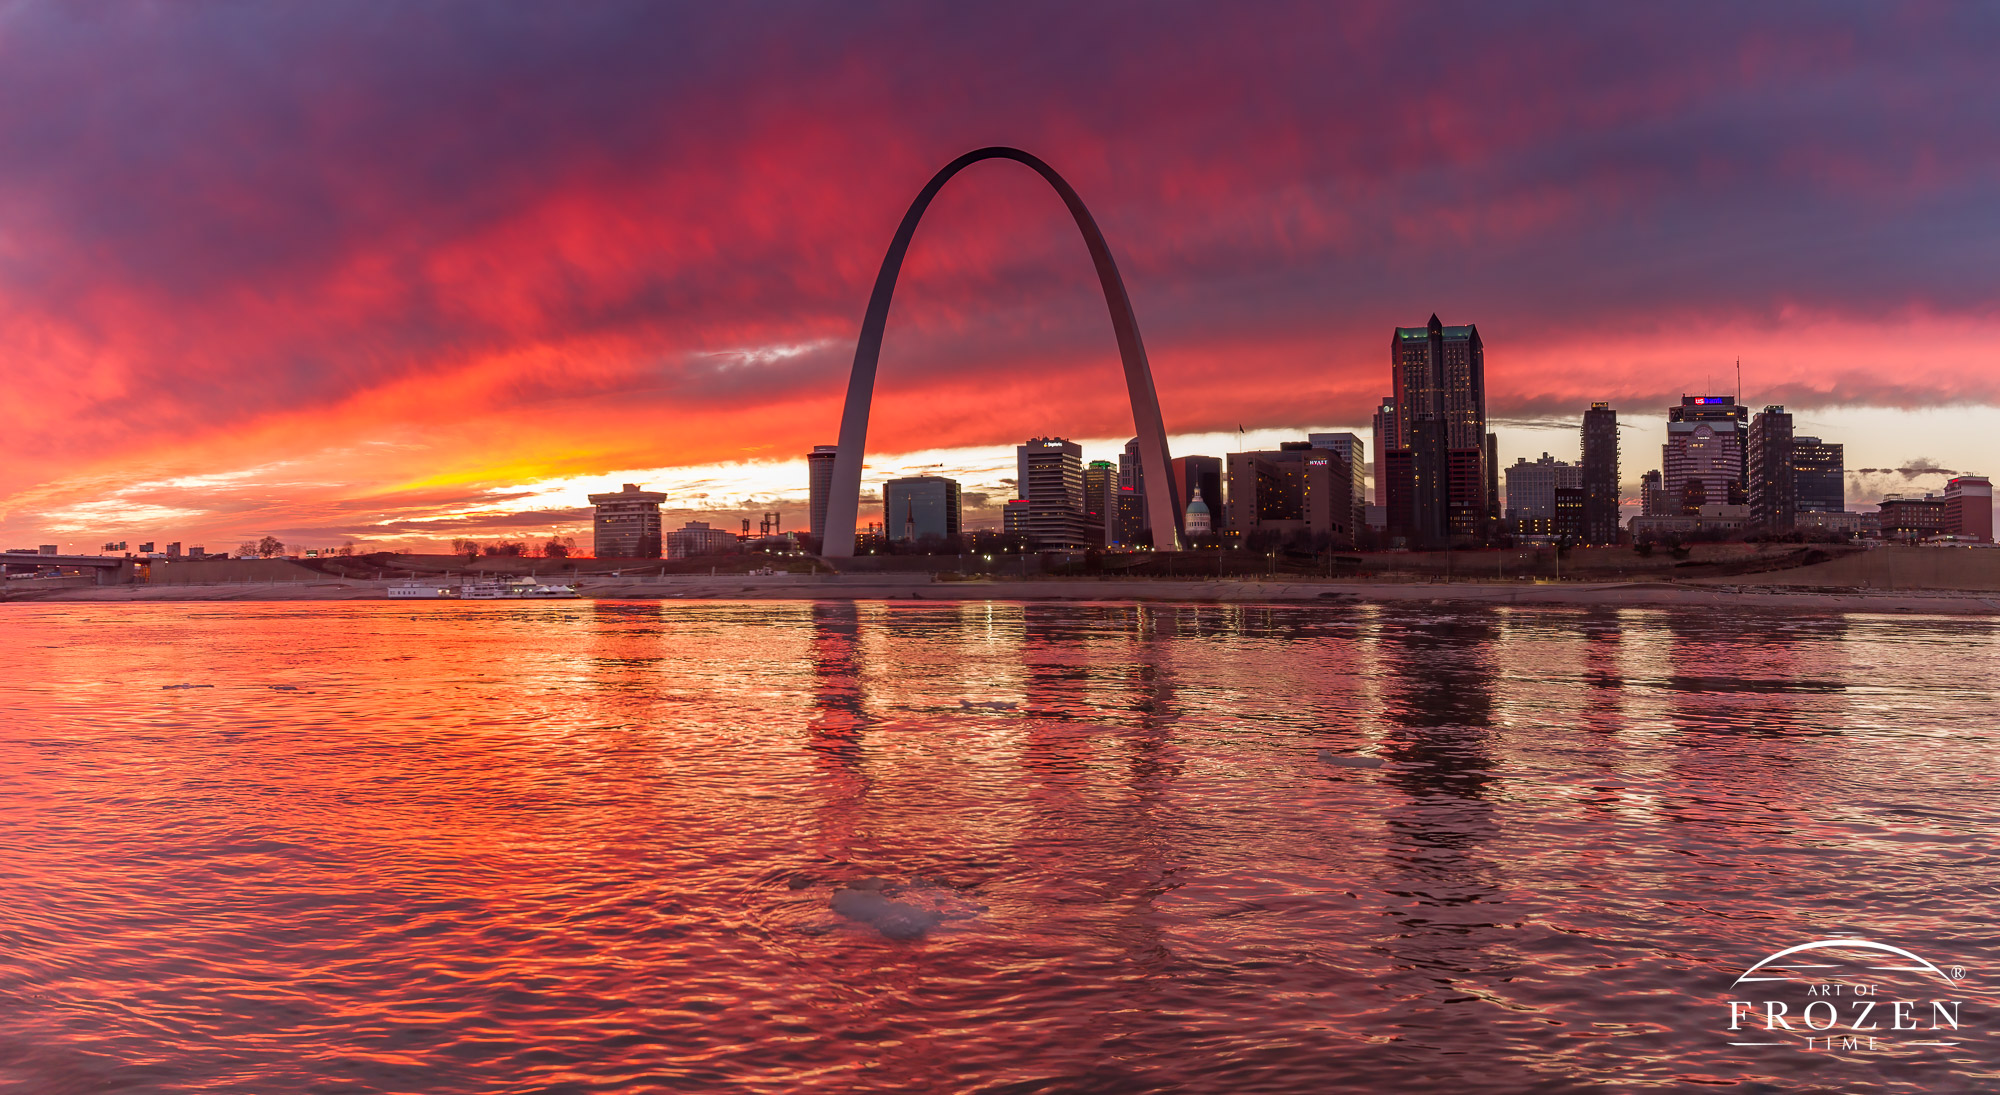 A fiery sunset over St Louis Missouri as captured across the Mississippi River which carries ice flows and reflects the St Louis skyline